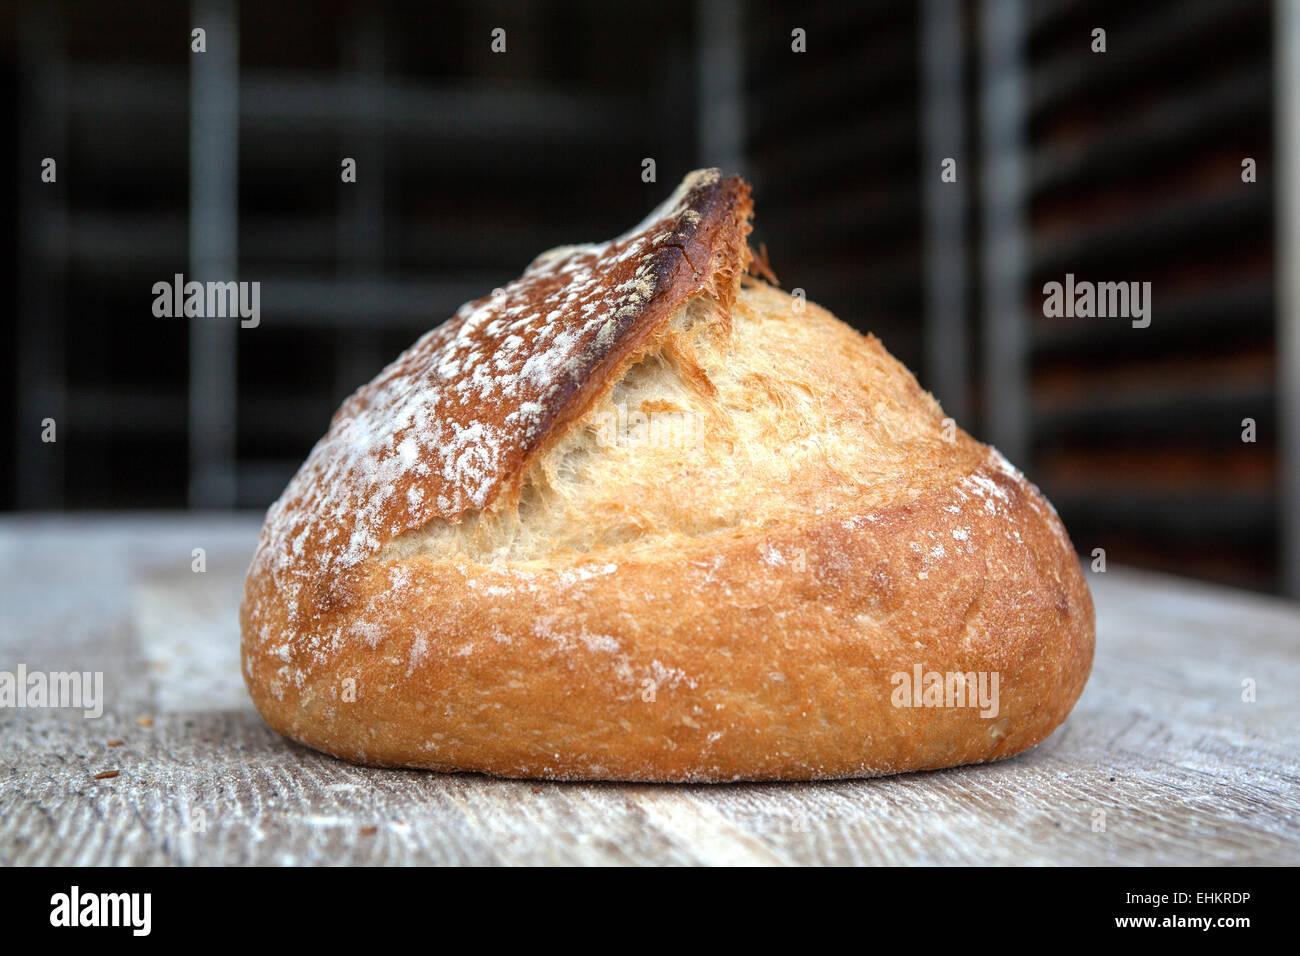 Loaf of Sourdough Bread Stock Photo